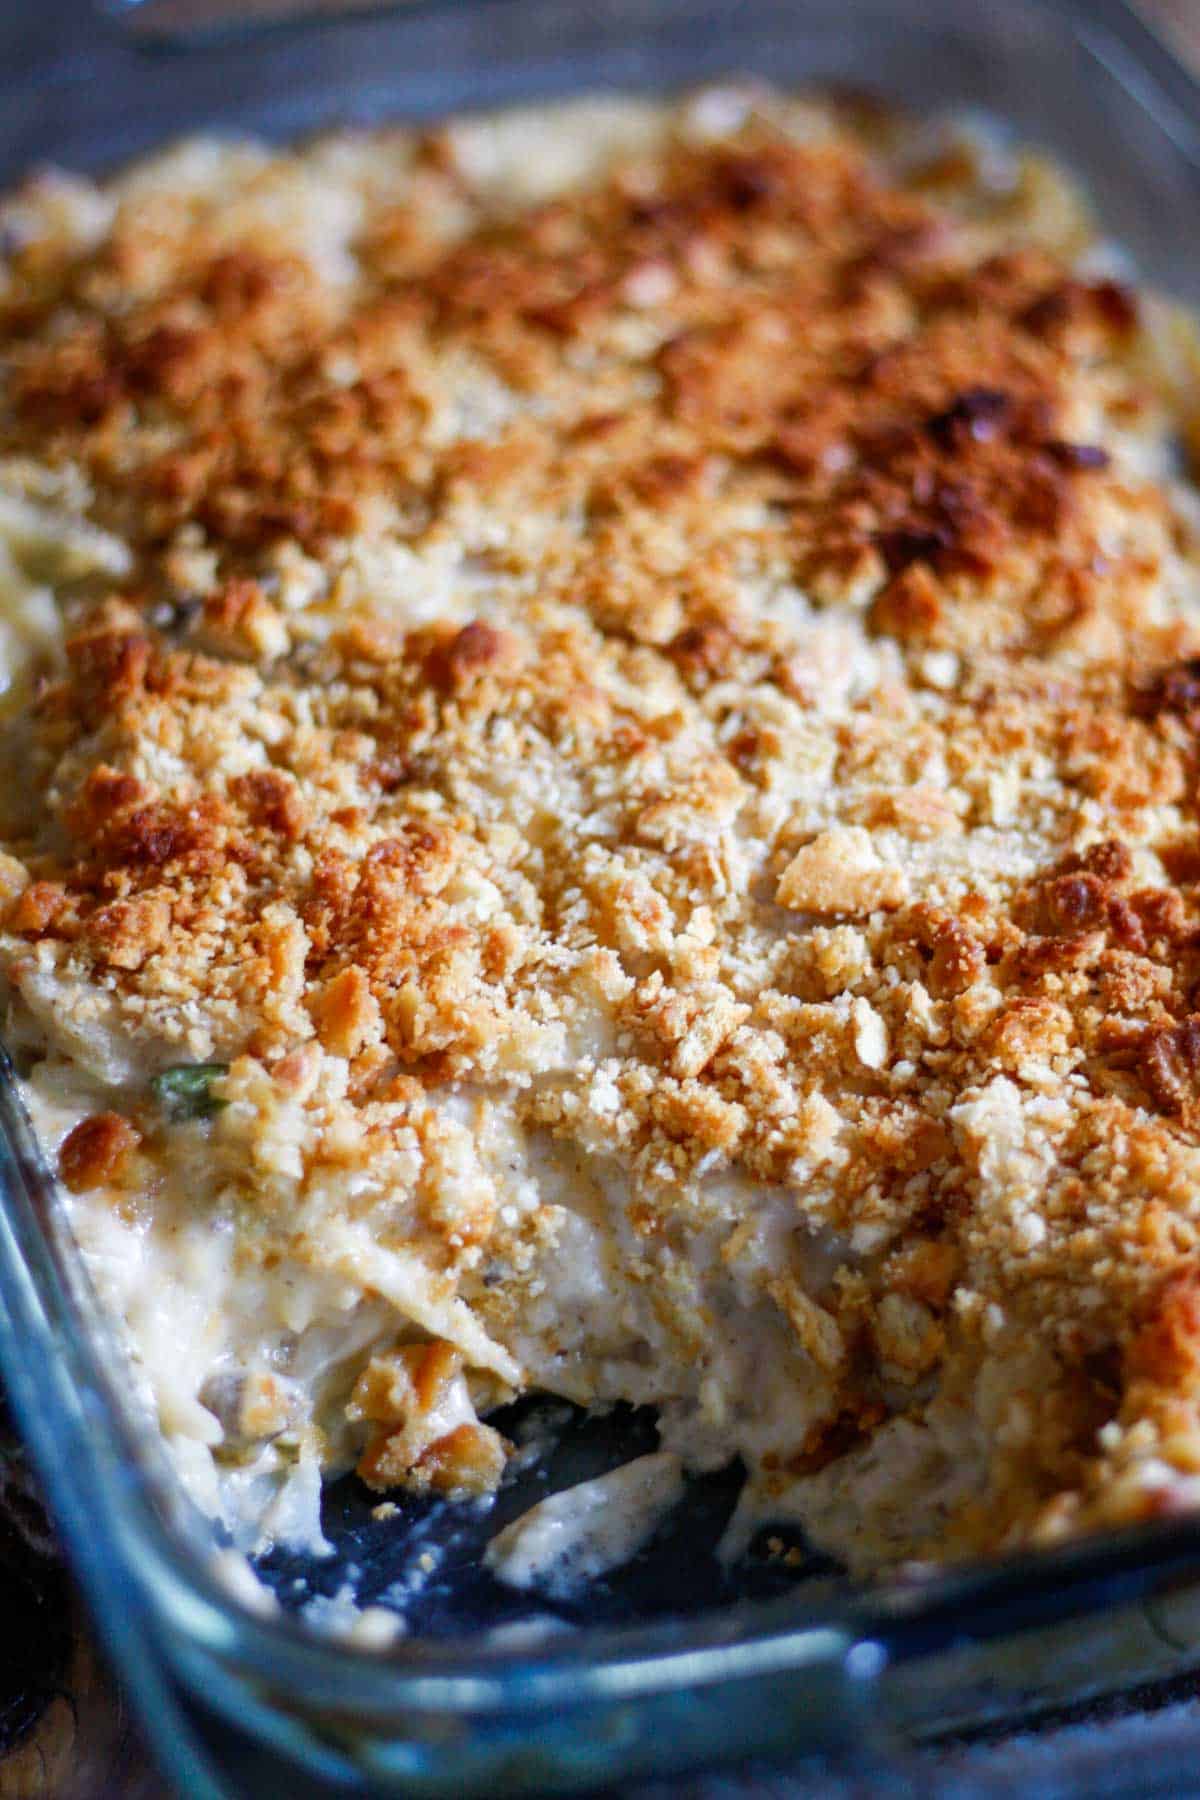 A large casserole dish containing a baked cheesy potato casserole with a browned topping consisting of crushed Ritz crackers. A scoop has been taken out of the casserole so that the inside creamy part of the casserole can be seen.